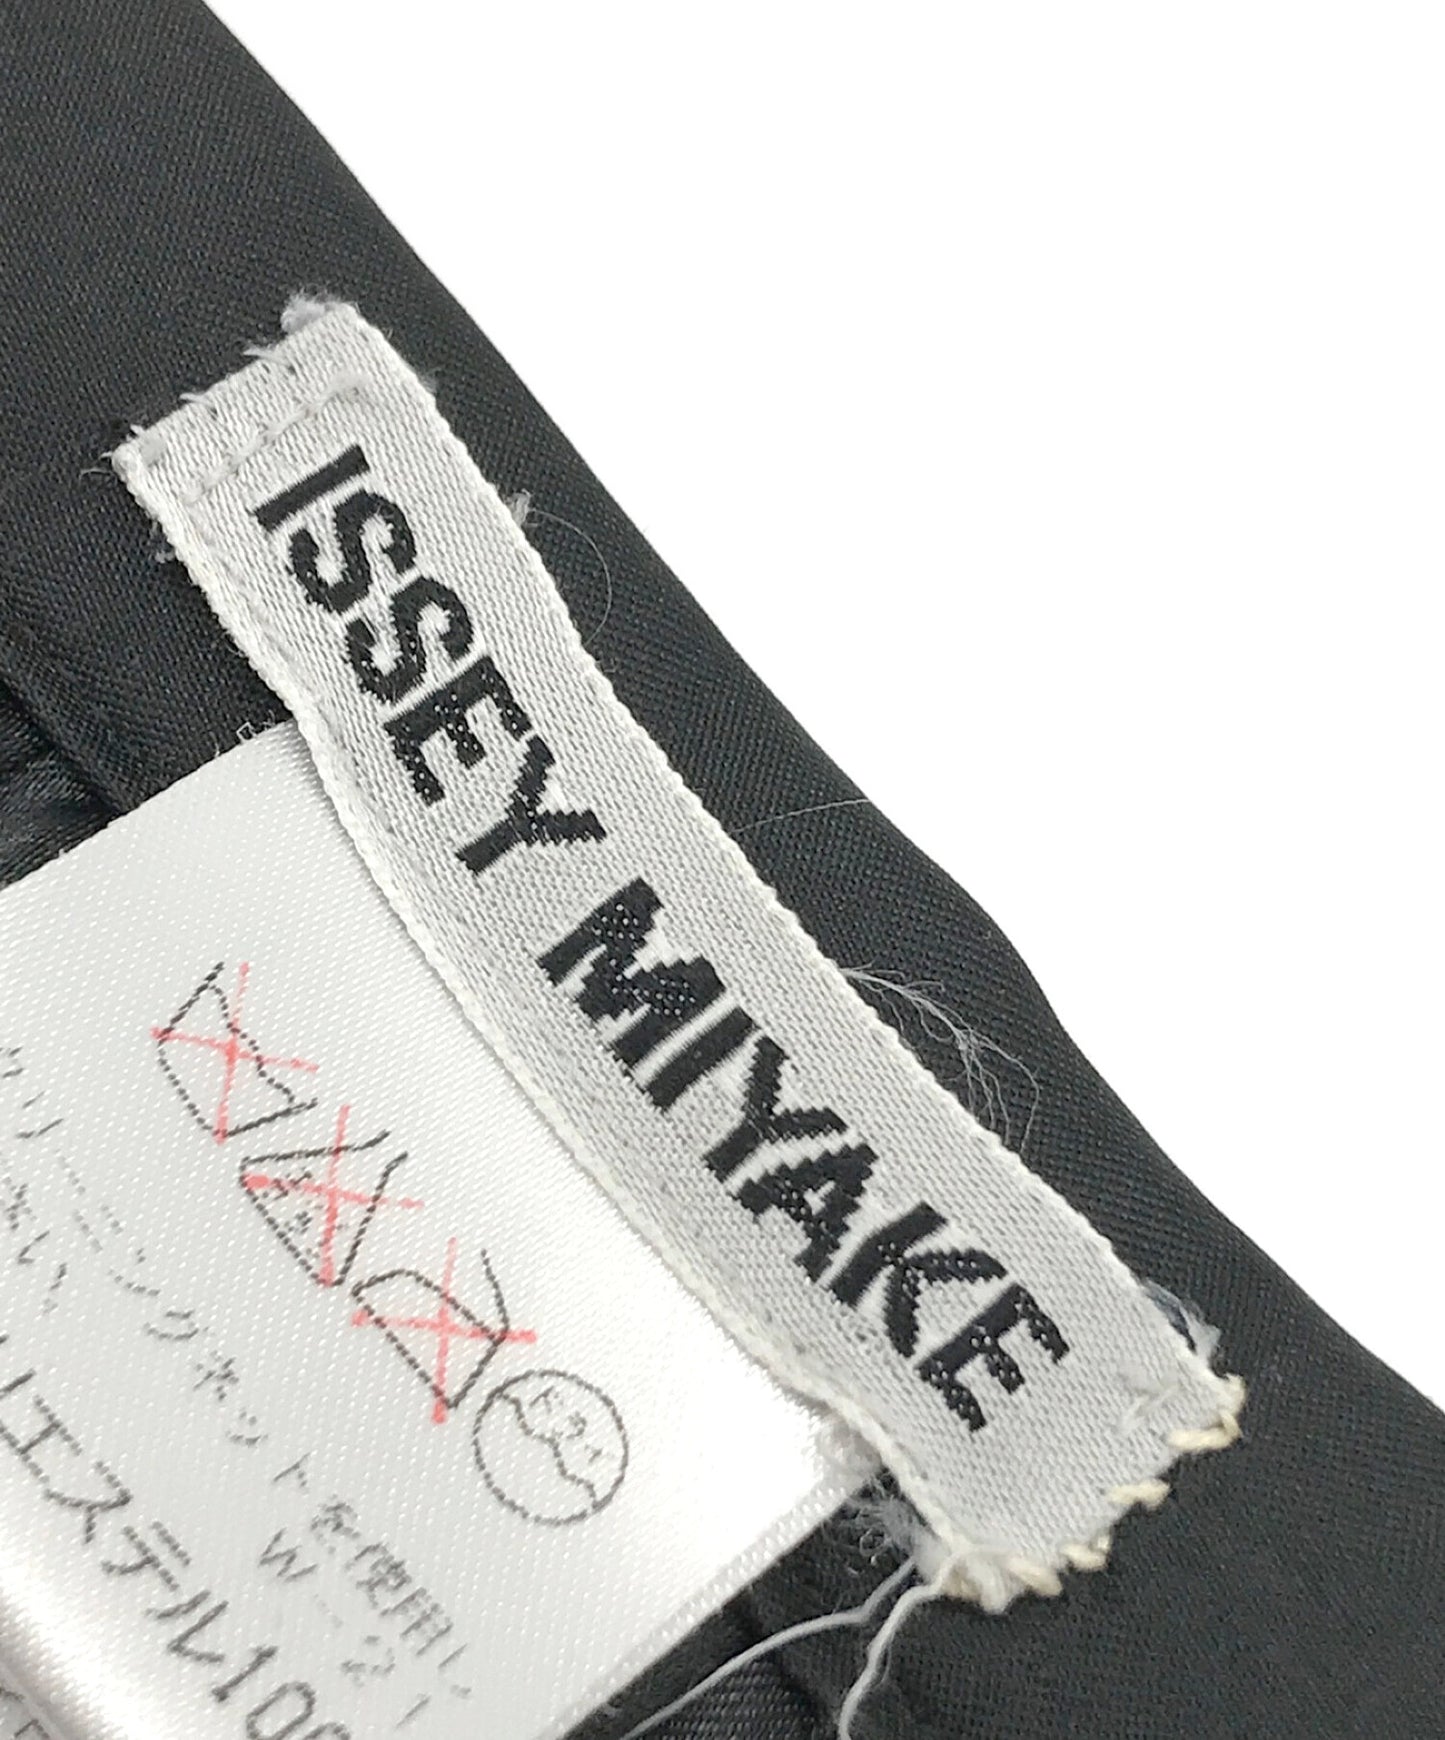 [Pre-owned] ISSEY MIYAKE pleated skirt IM61-FG933